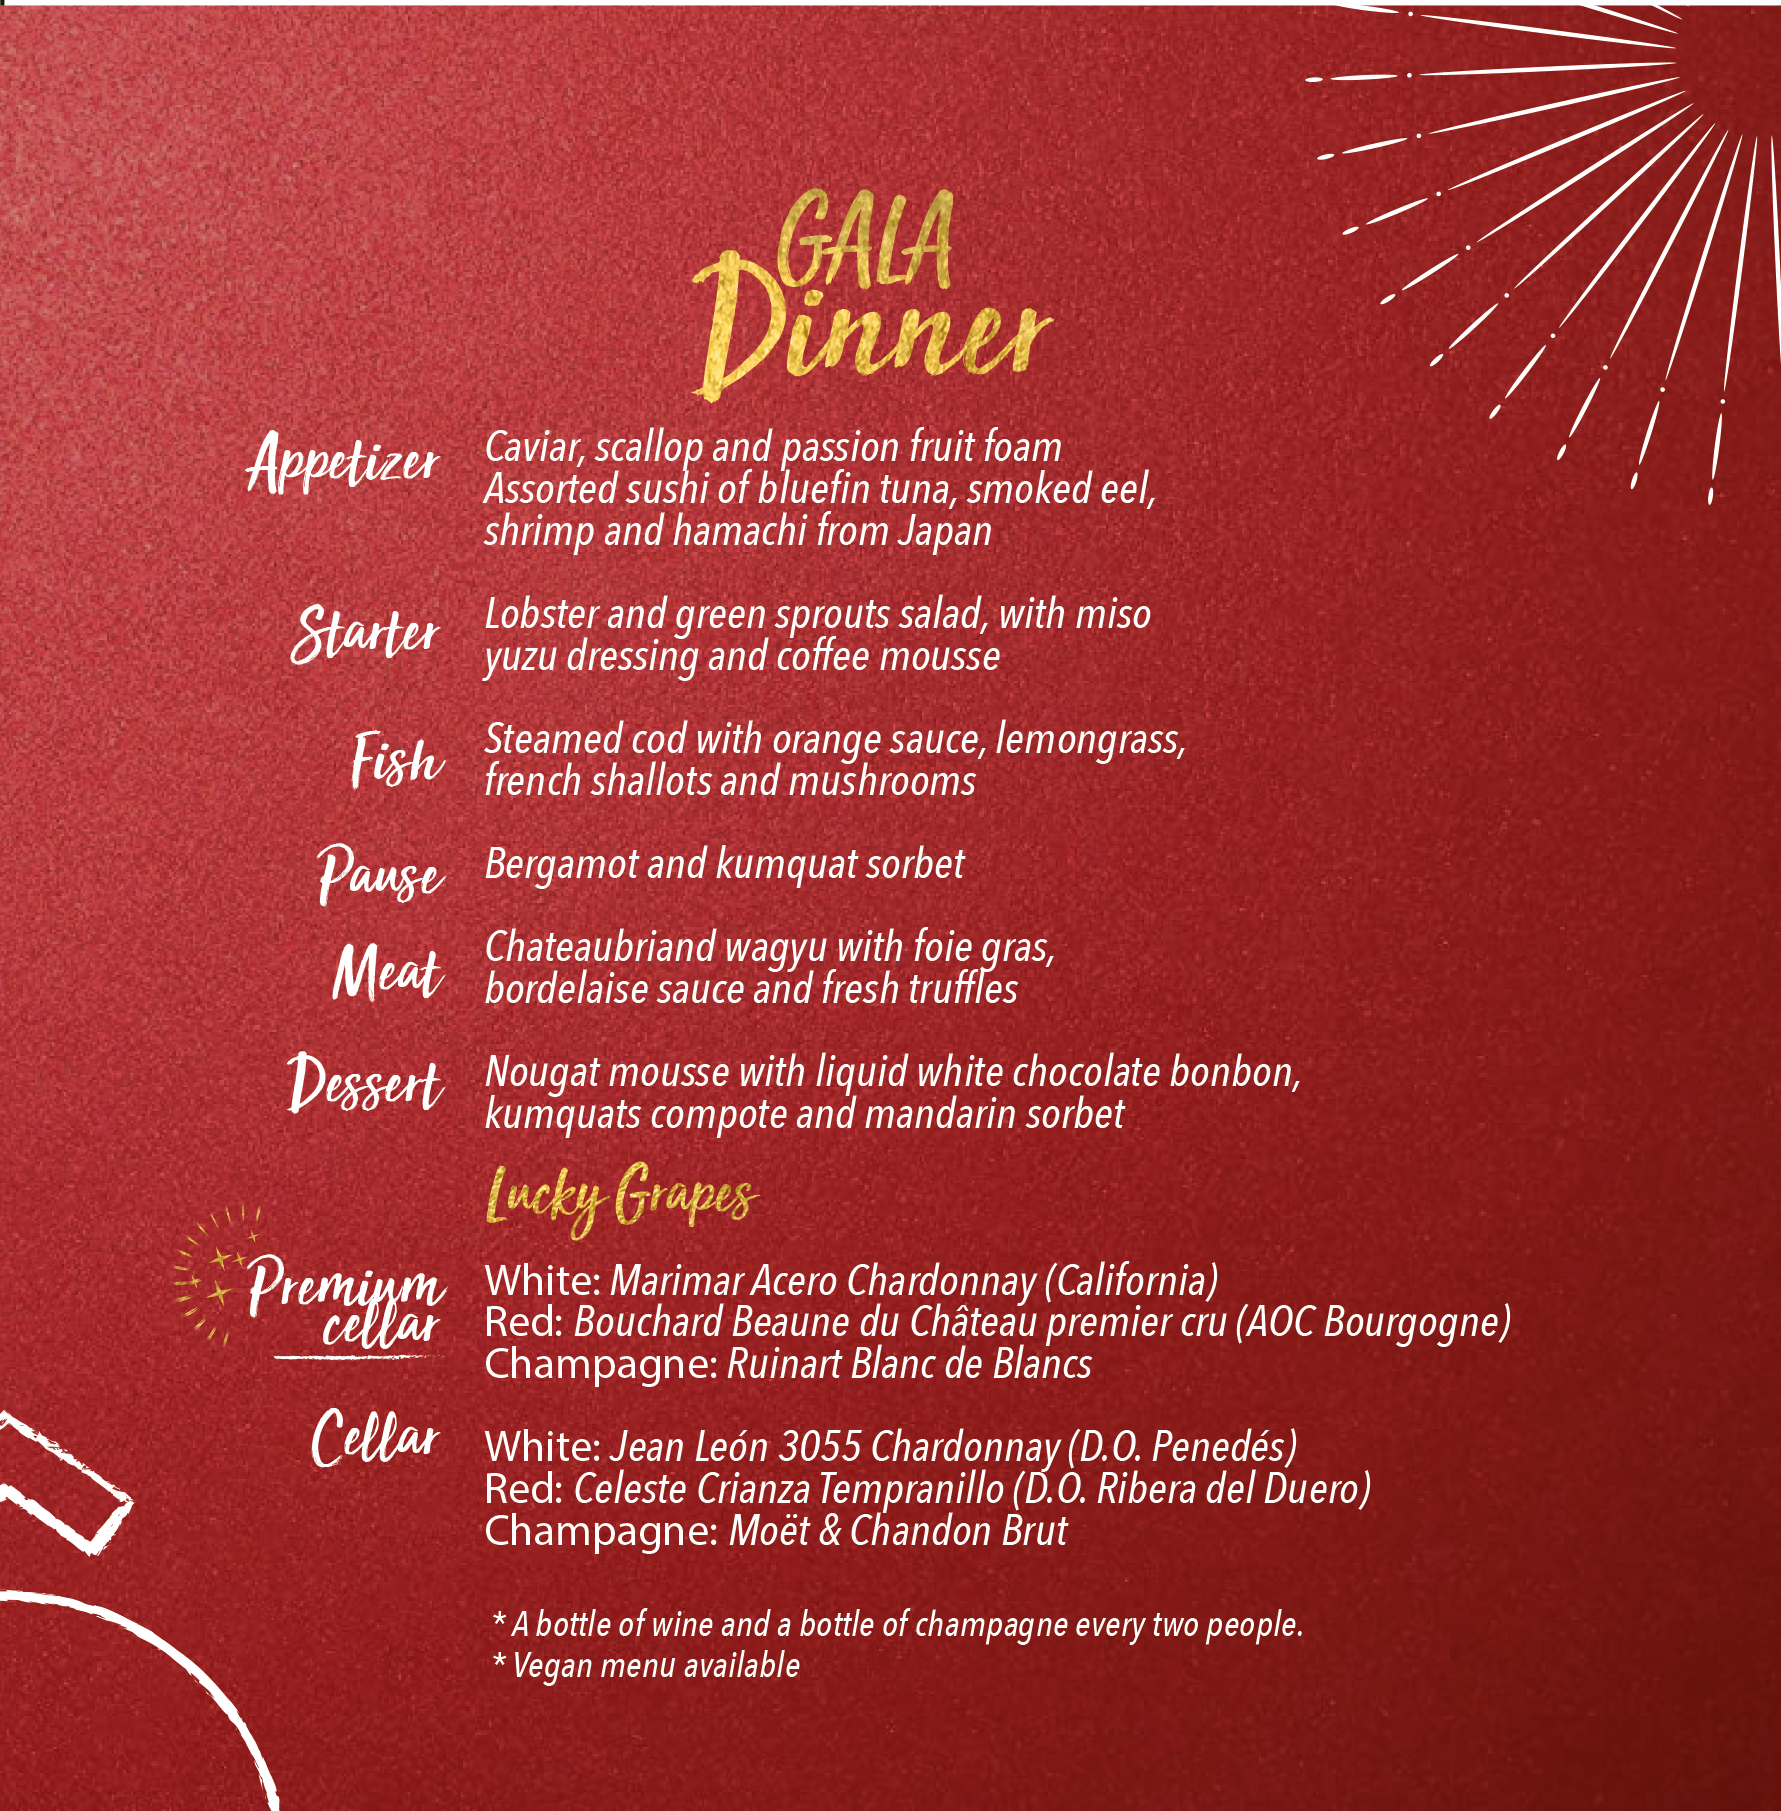 GALA DINNER SHOW – NEW YEAR’S EVE